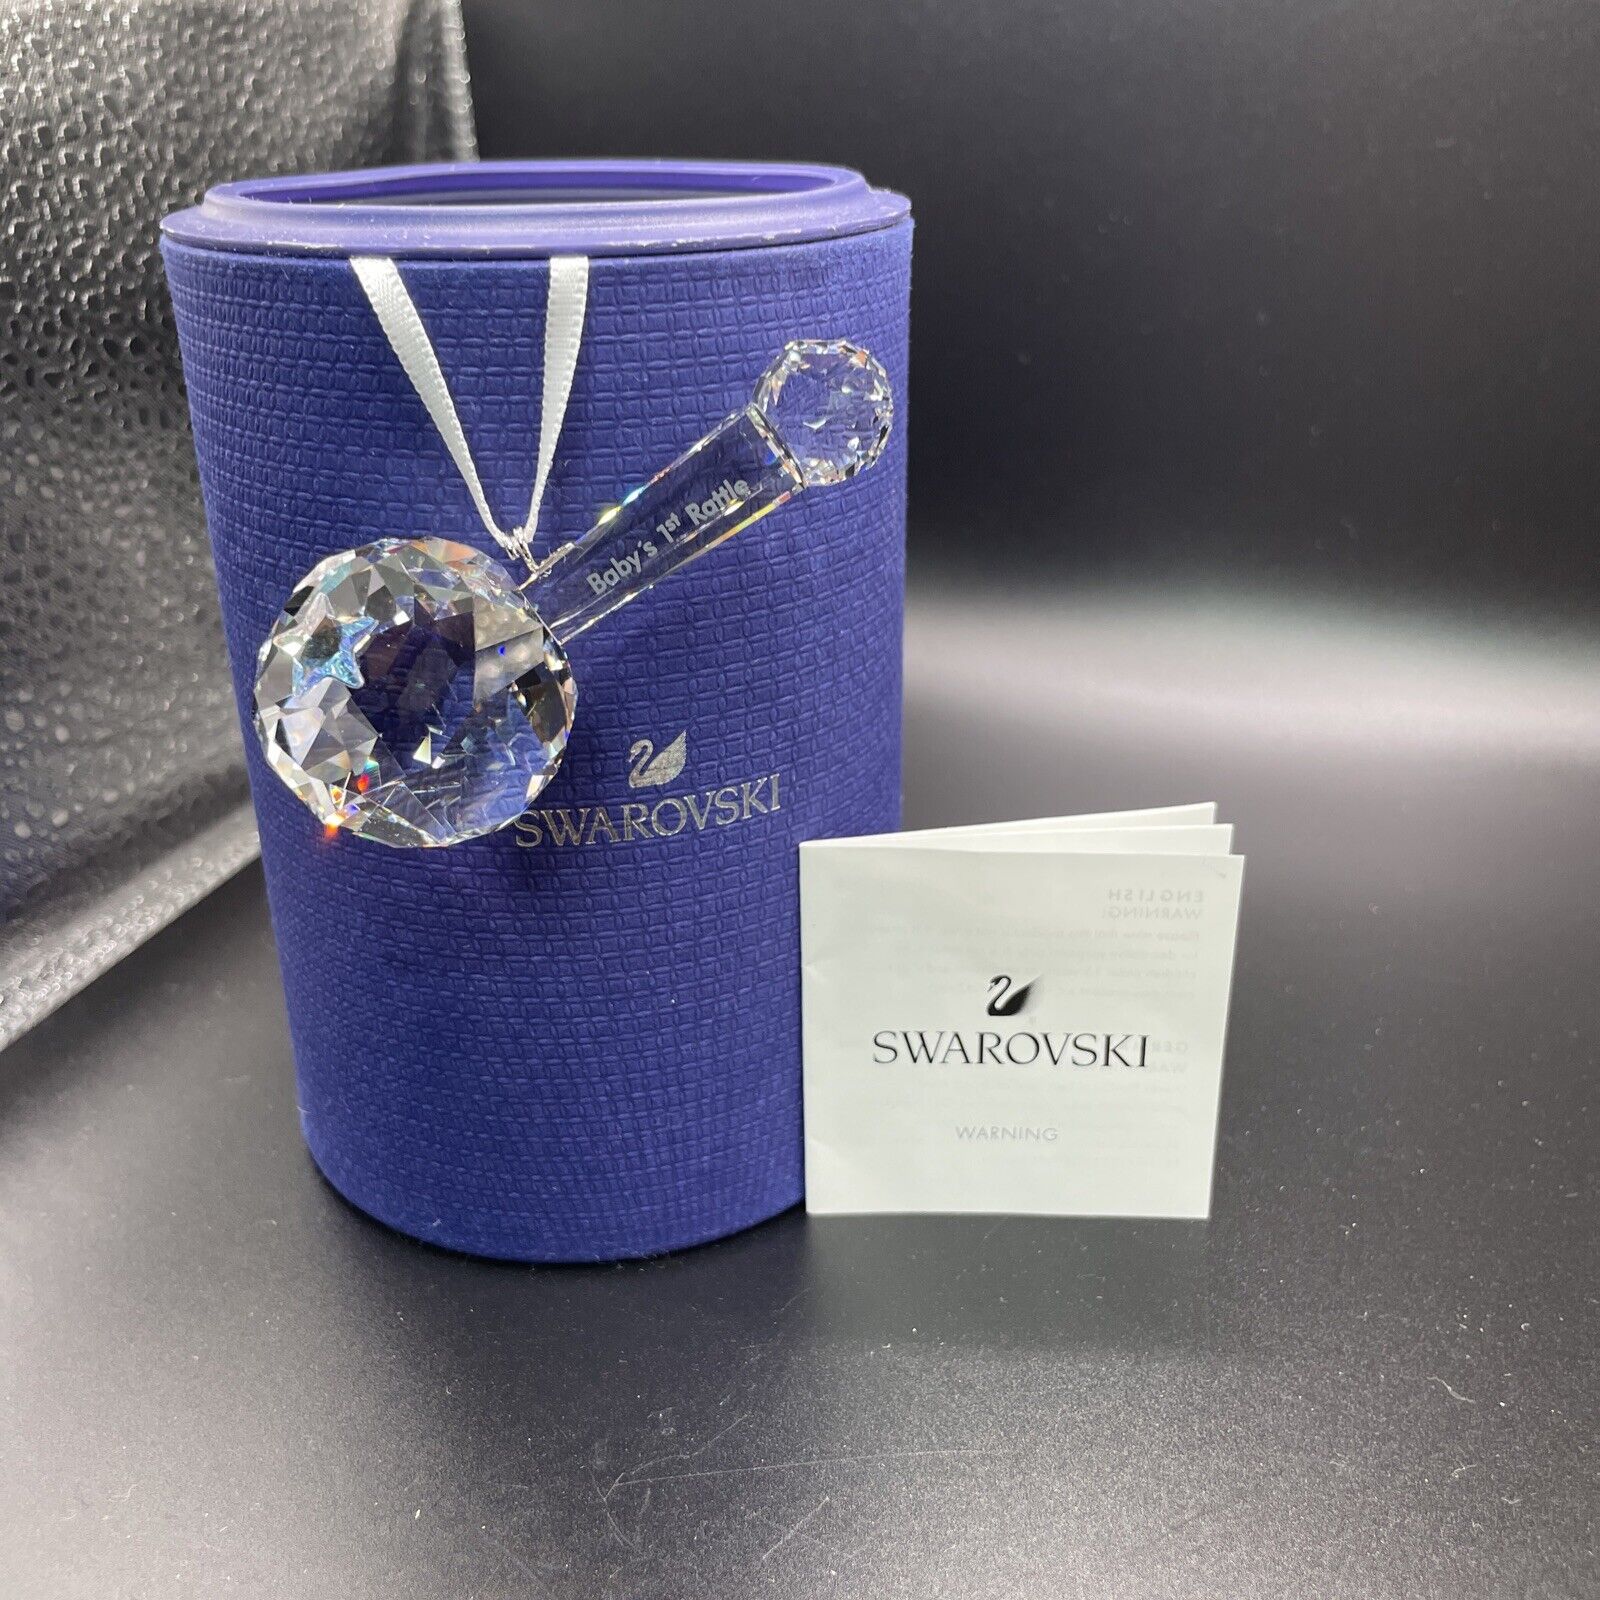 New In Box 100% Authentic Swarovski Baby\'s 1st Rattle Crystal Ornament #5492220